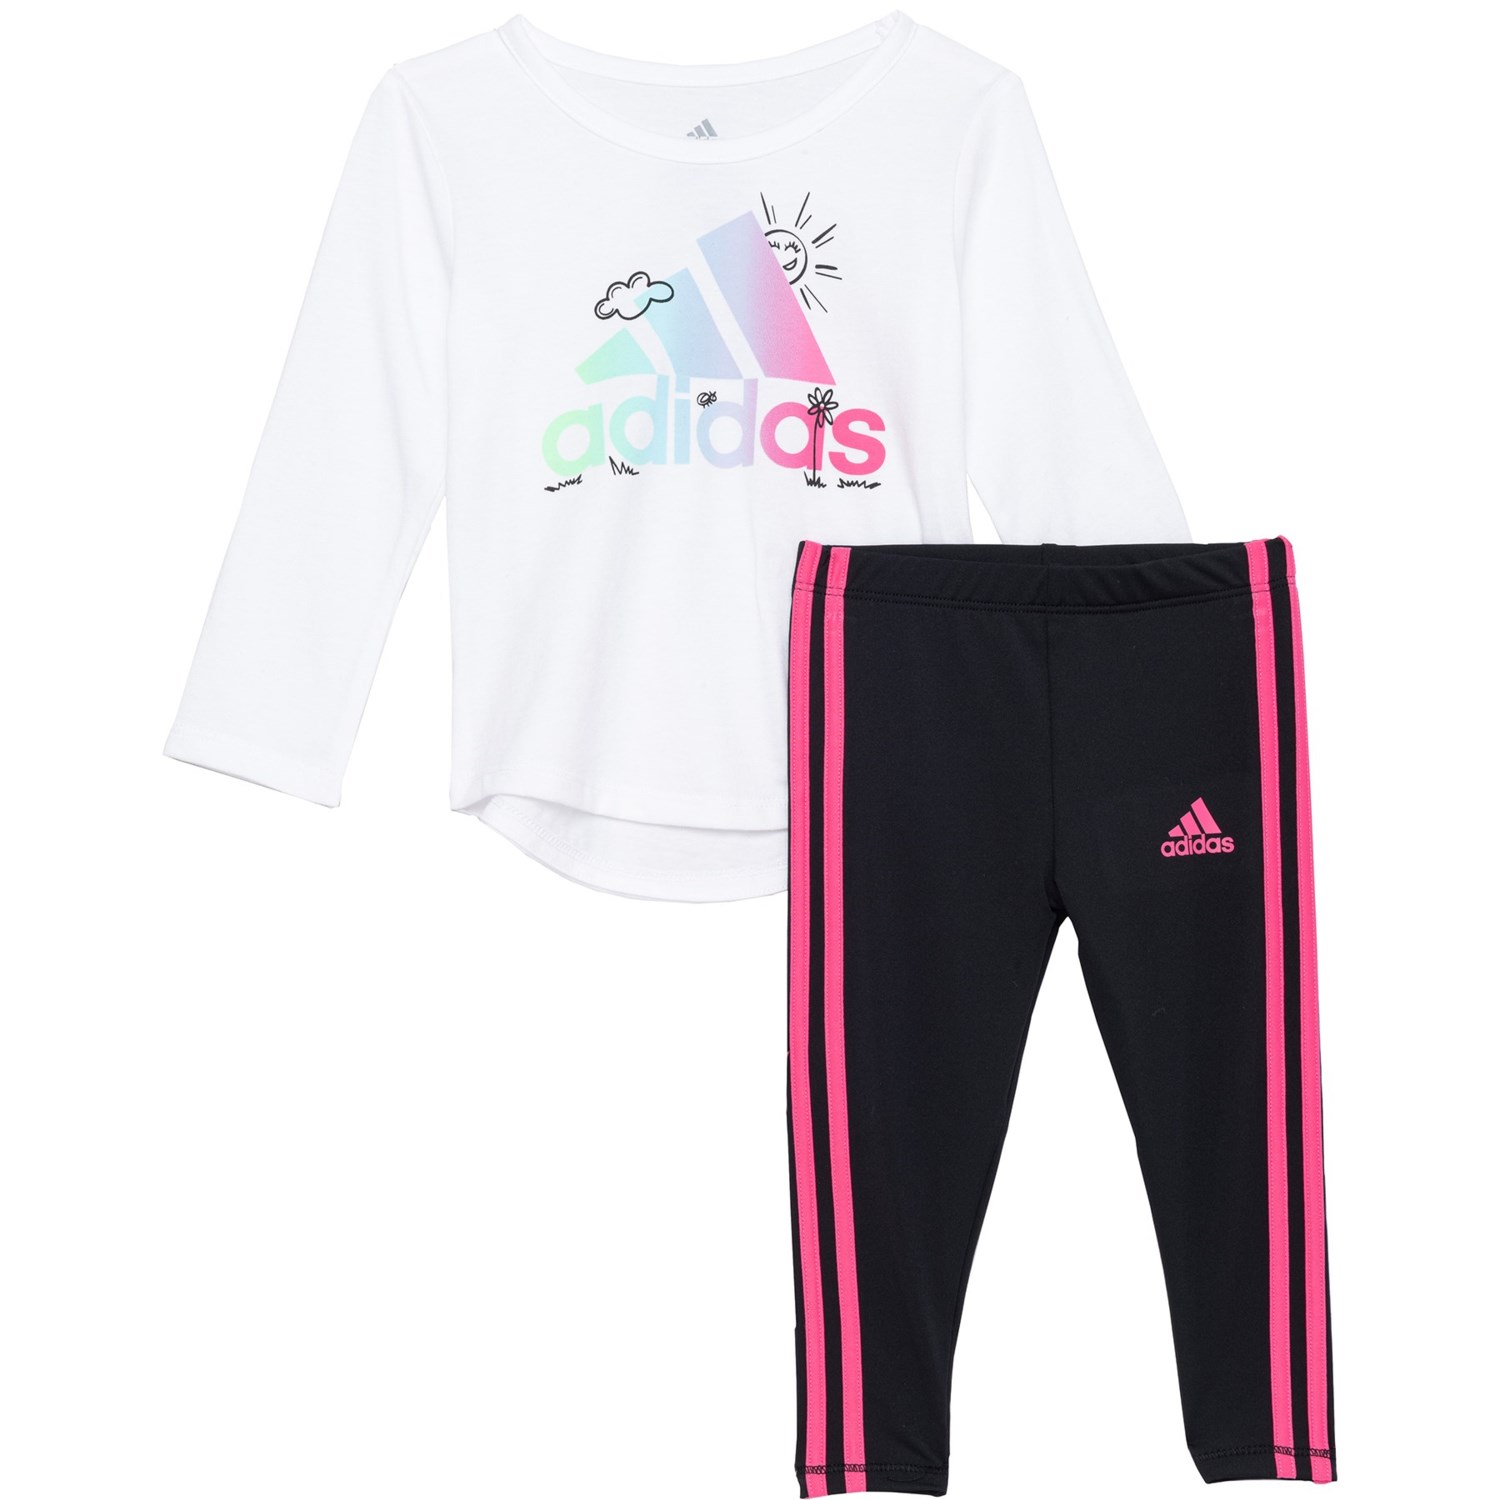 Adidas Infant Girls Jersey T-Shirt and Tights Set - Long Sleeve